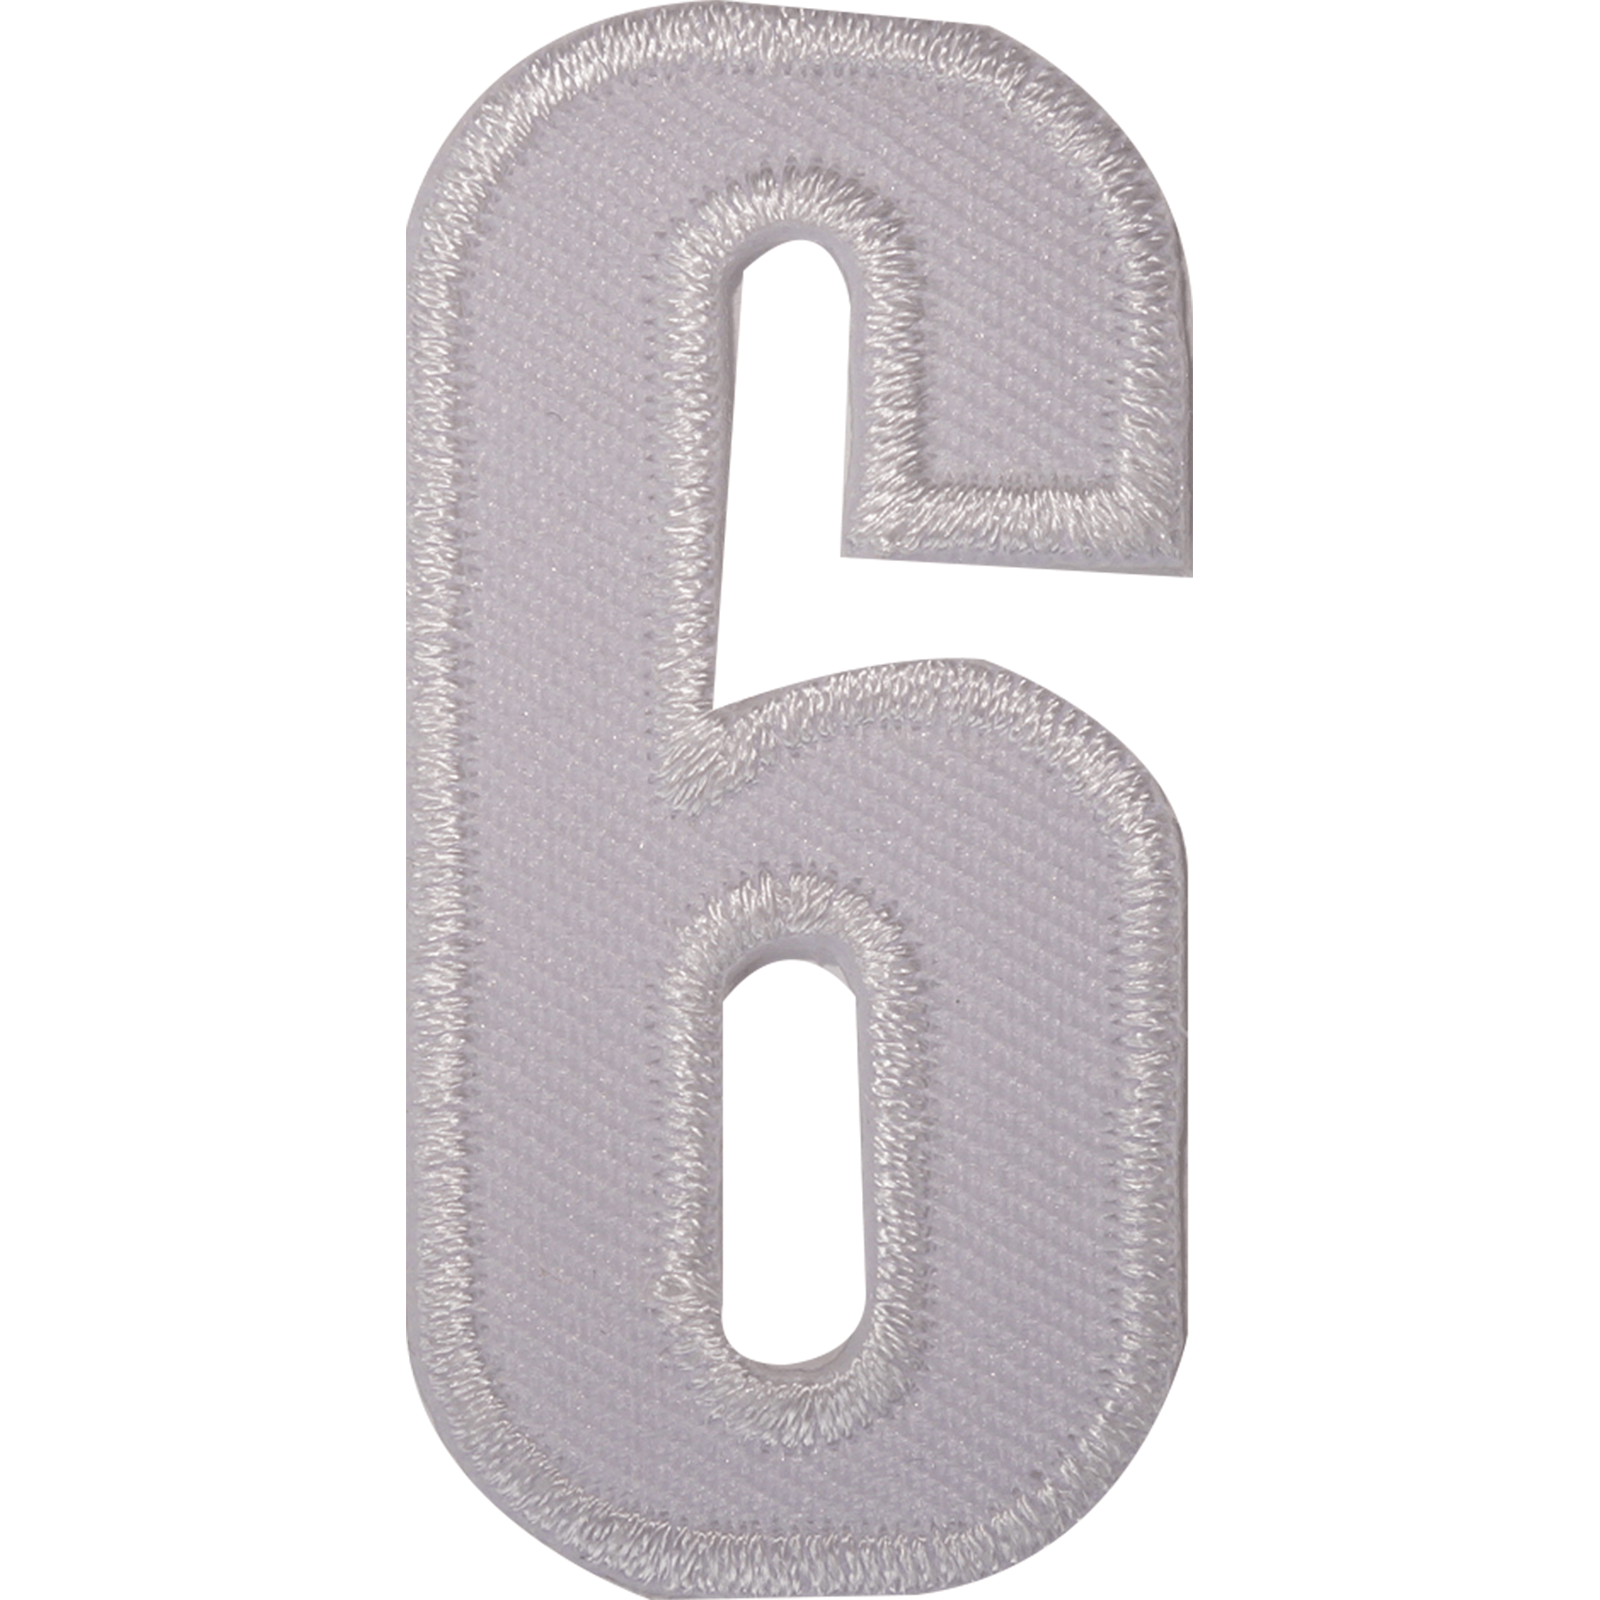 Number 6 ( Number Six ) White Letter Number Iron Sew On Patches Badges Name Letters Numbers Badge Patch